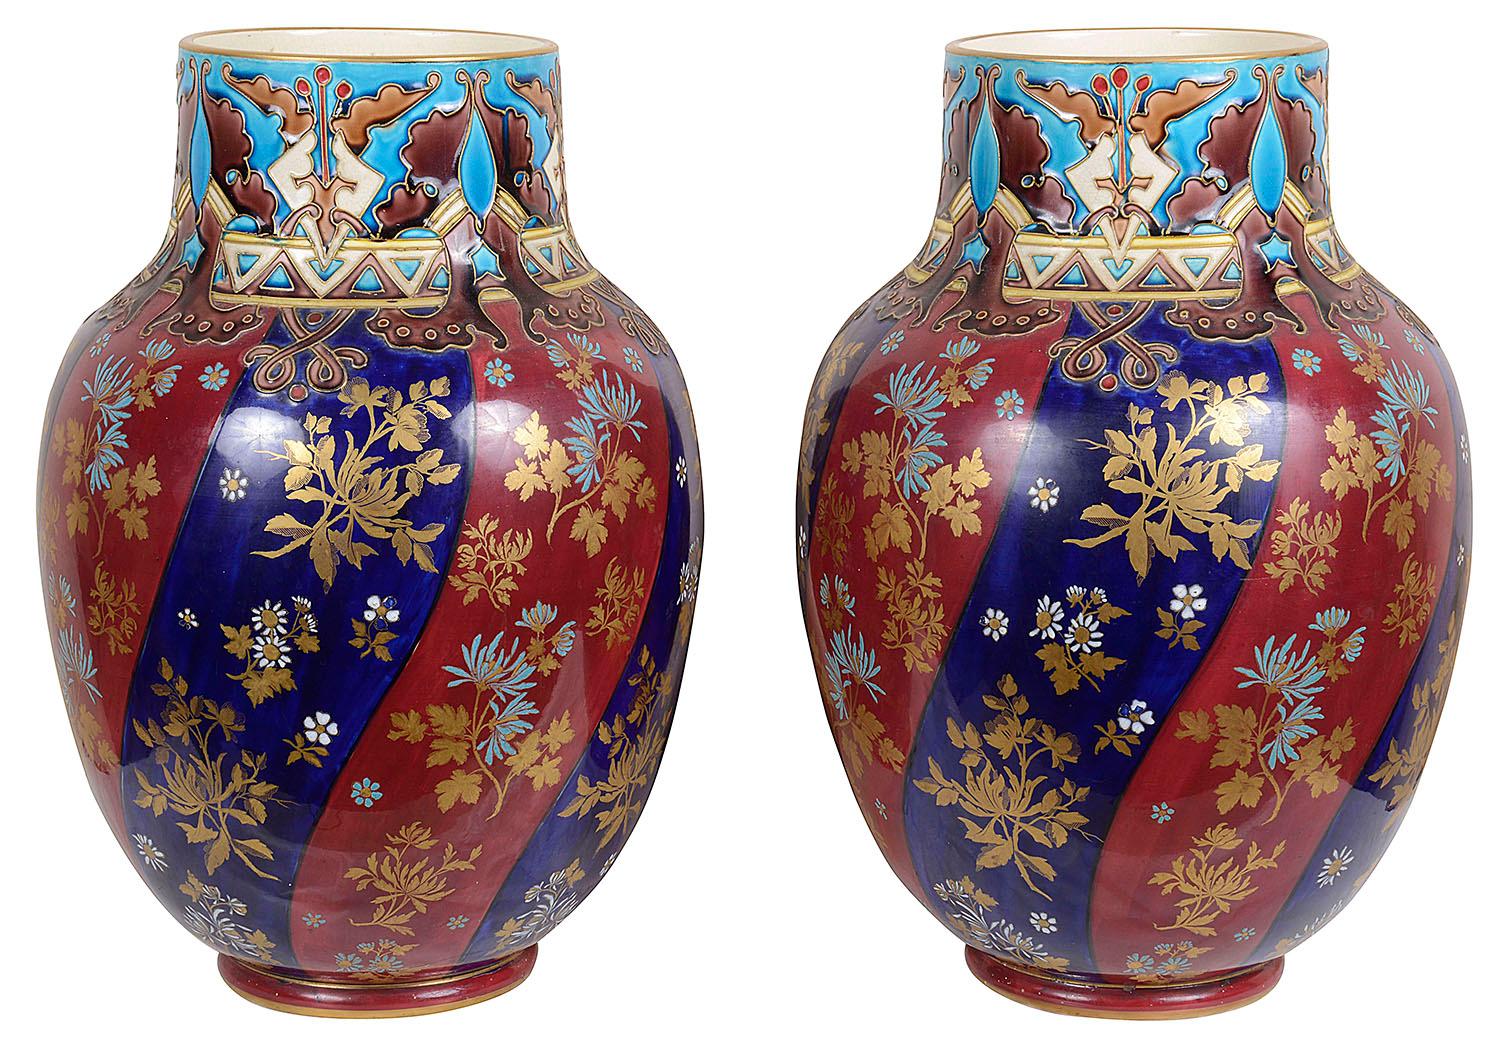 A very decorative pair of late 19th century Majolica hand painted vases / lamps. Each having turquoise, cobalt blue and burgundy ground, motif decoration to the necks, foliate and flowers decoration below.
The vases can be converted to lamps within